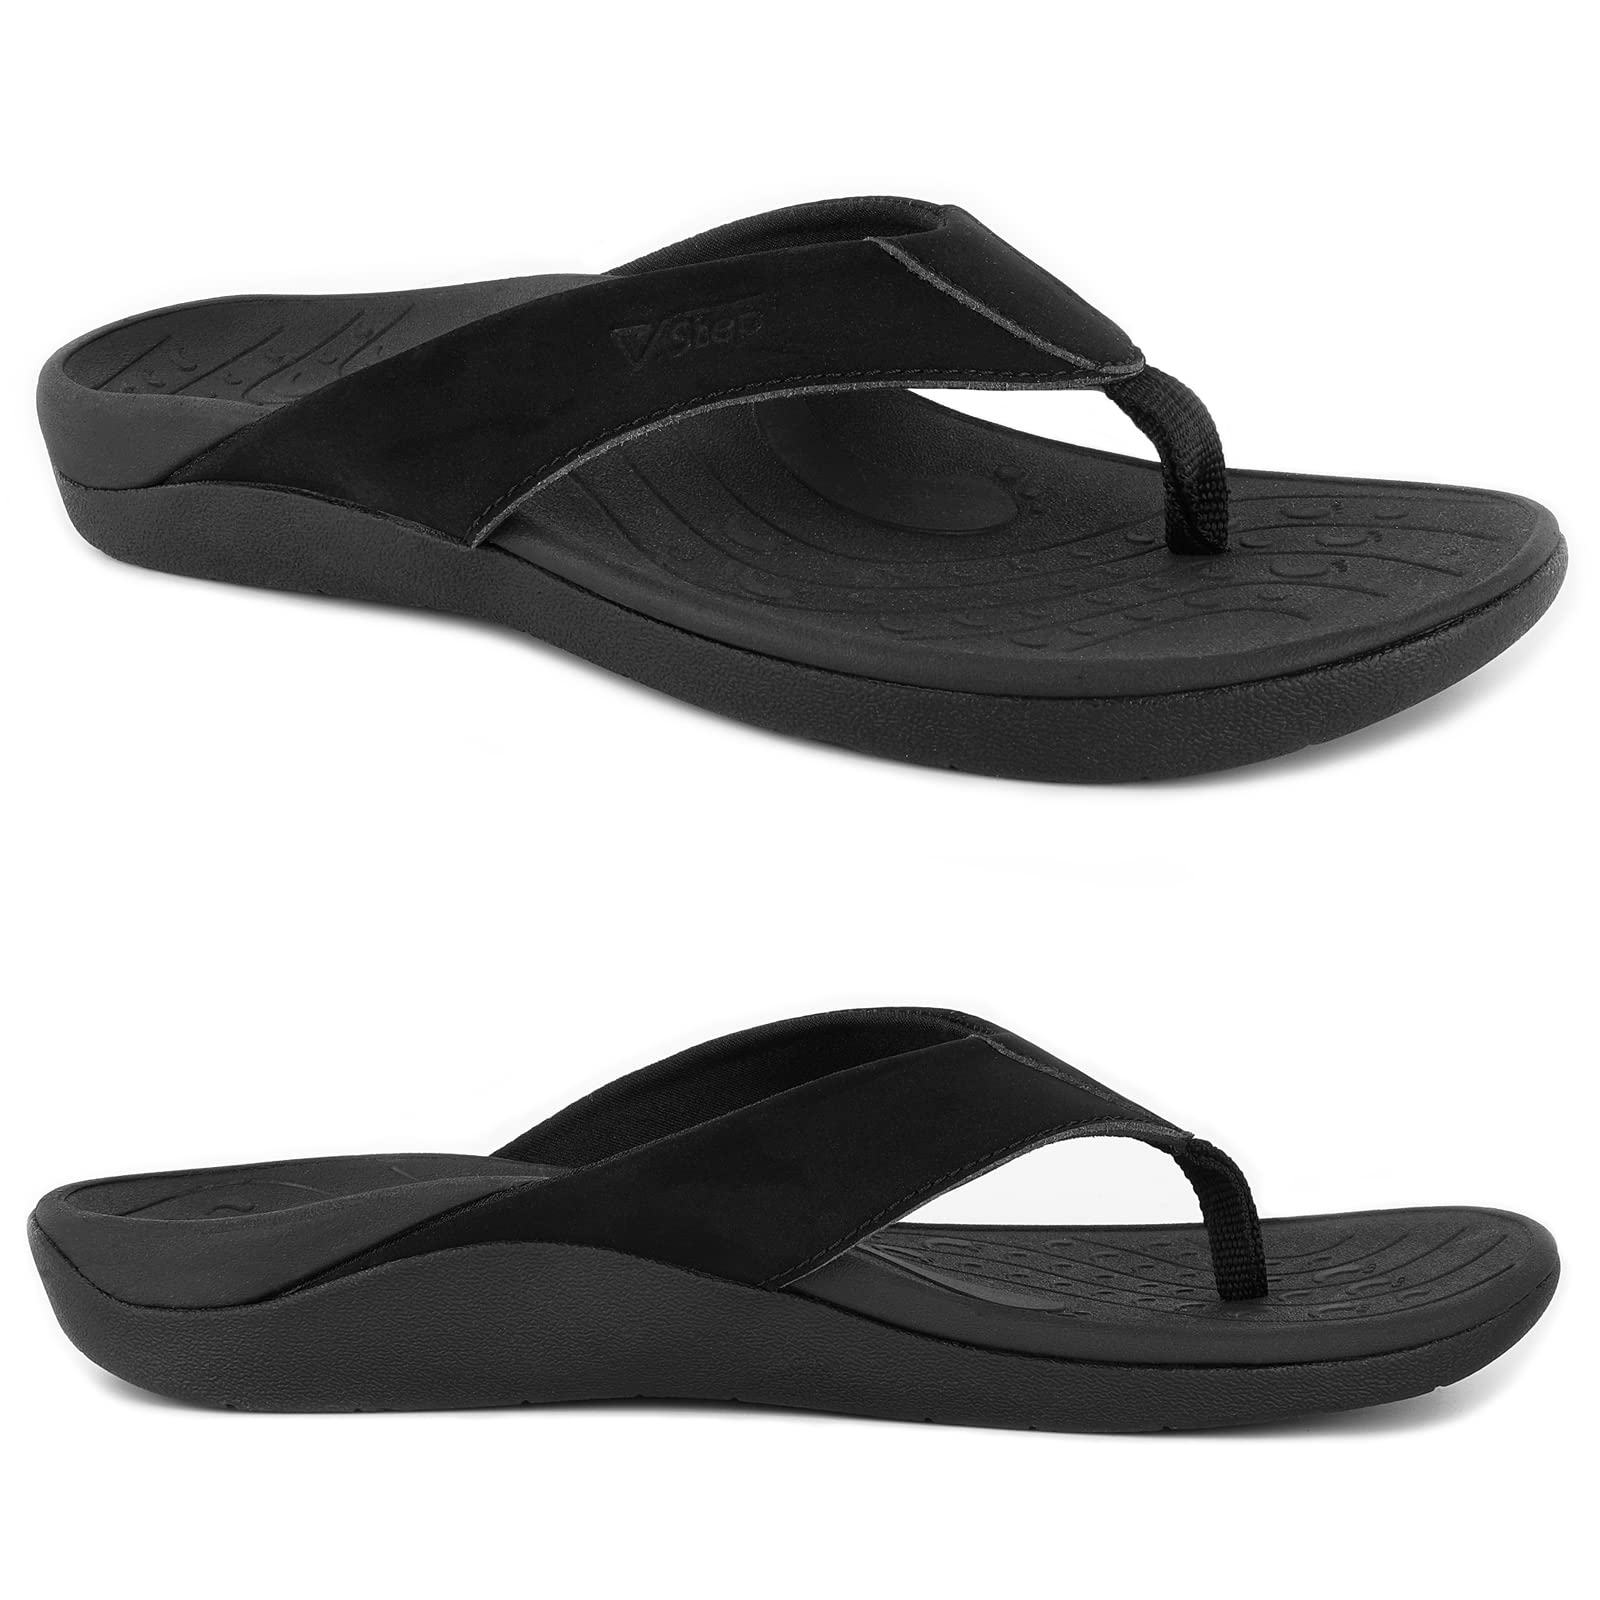  ARCHIES Footwear - Flip Flop Sandals – Offering Great Arch  Support and Comfort - Black (Women's US 5/Men's US 4)